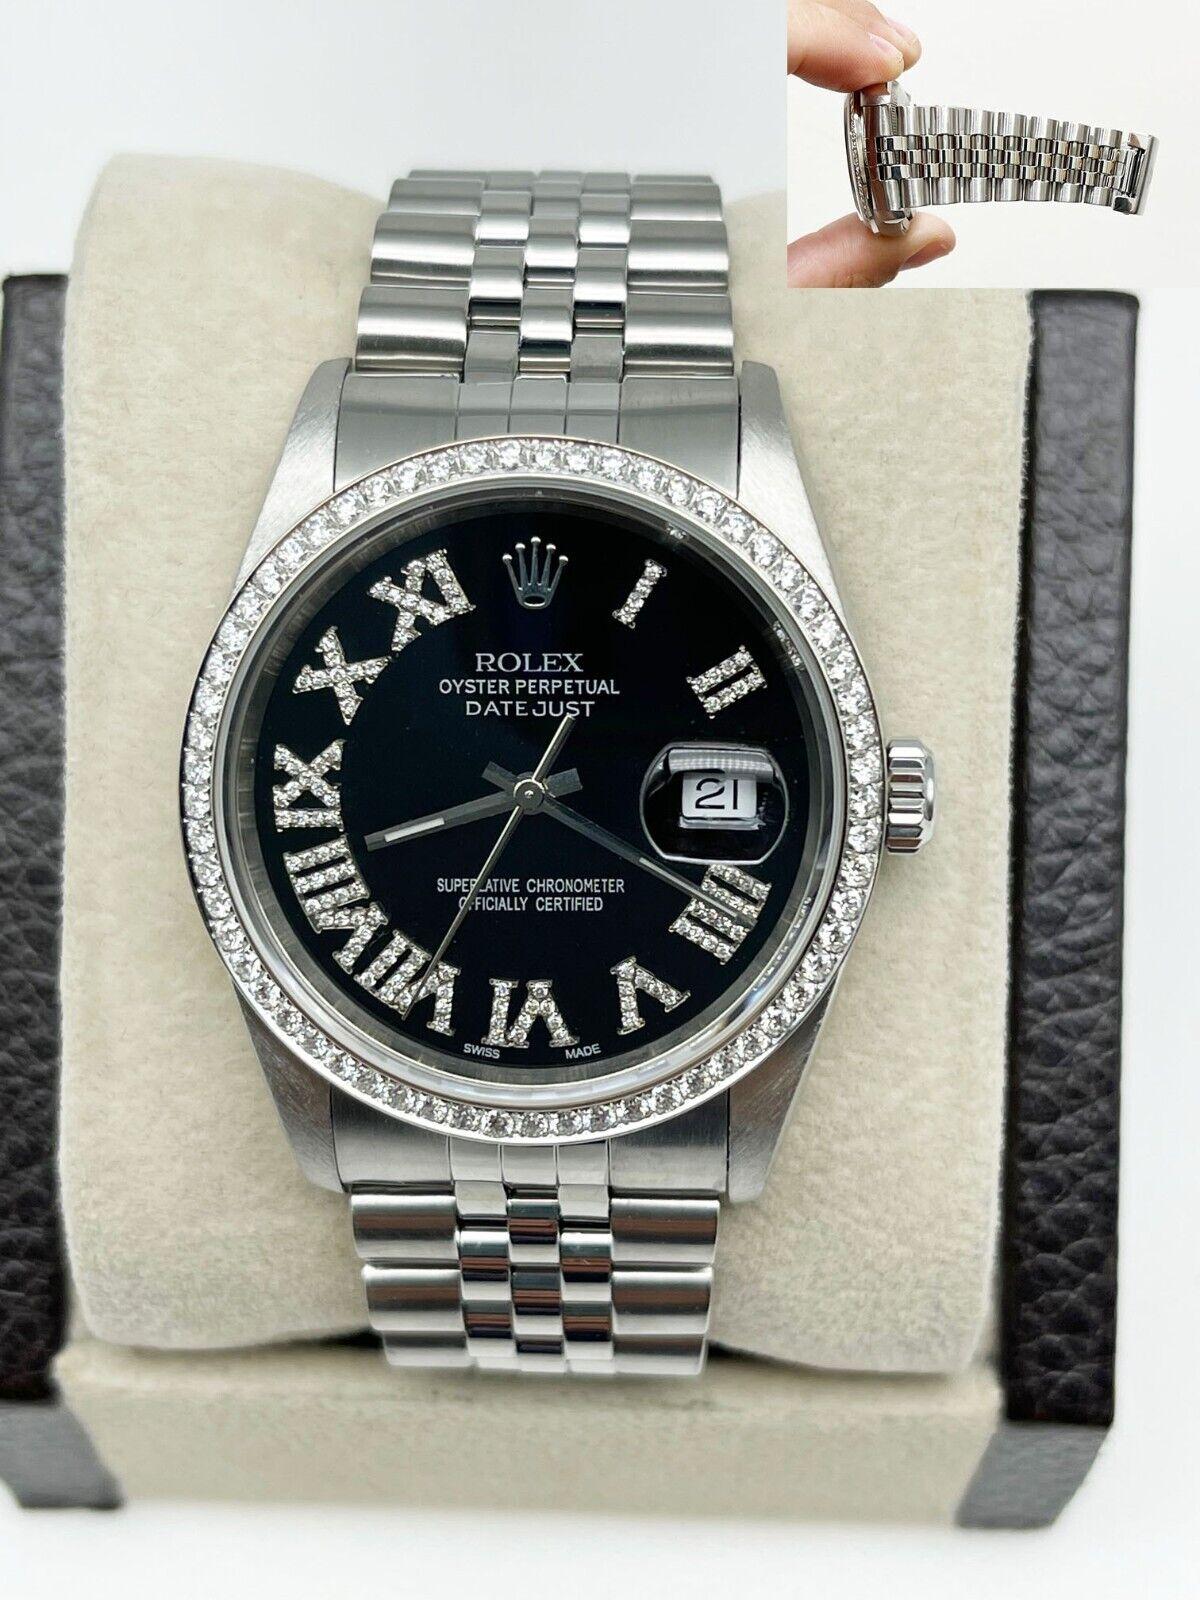 Style Number: 16234

 

Serial: Y605***


Year: 2002

 

Model: Datejust

 

Case Material: Stainless Steel

 

Band: Stainless Steel

 

Bezel: Custom Diamond bezel

 

Dial: Black Custom Roman dial

 

Face: Sapphire Crystal

 

Case Size: 36mm

